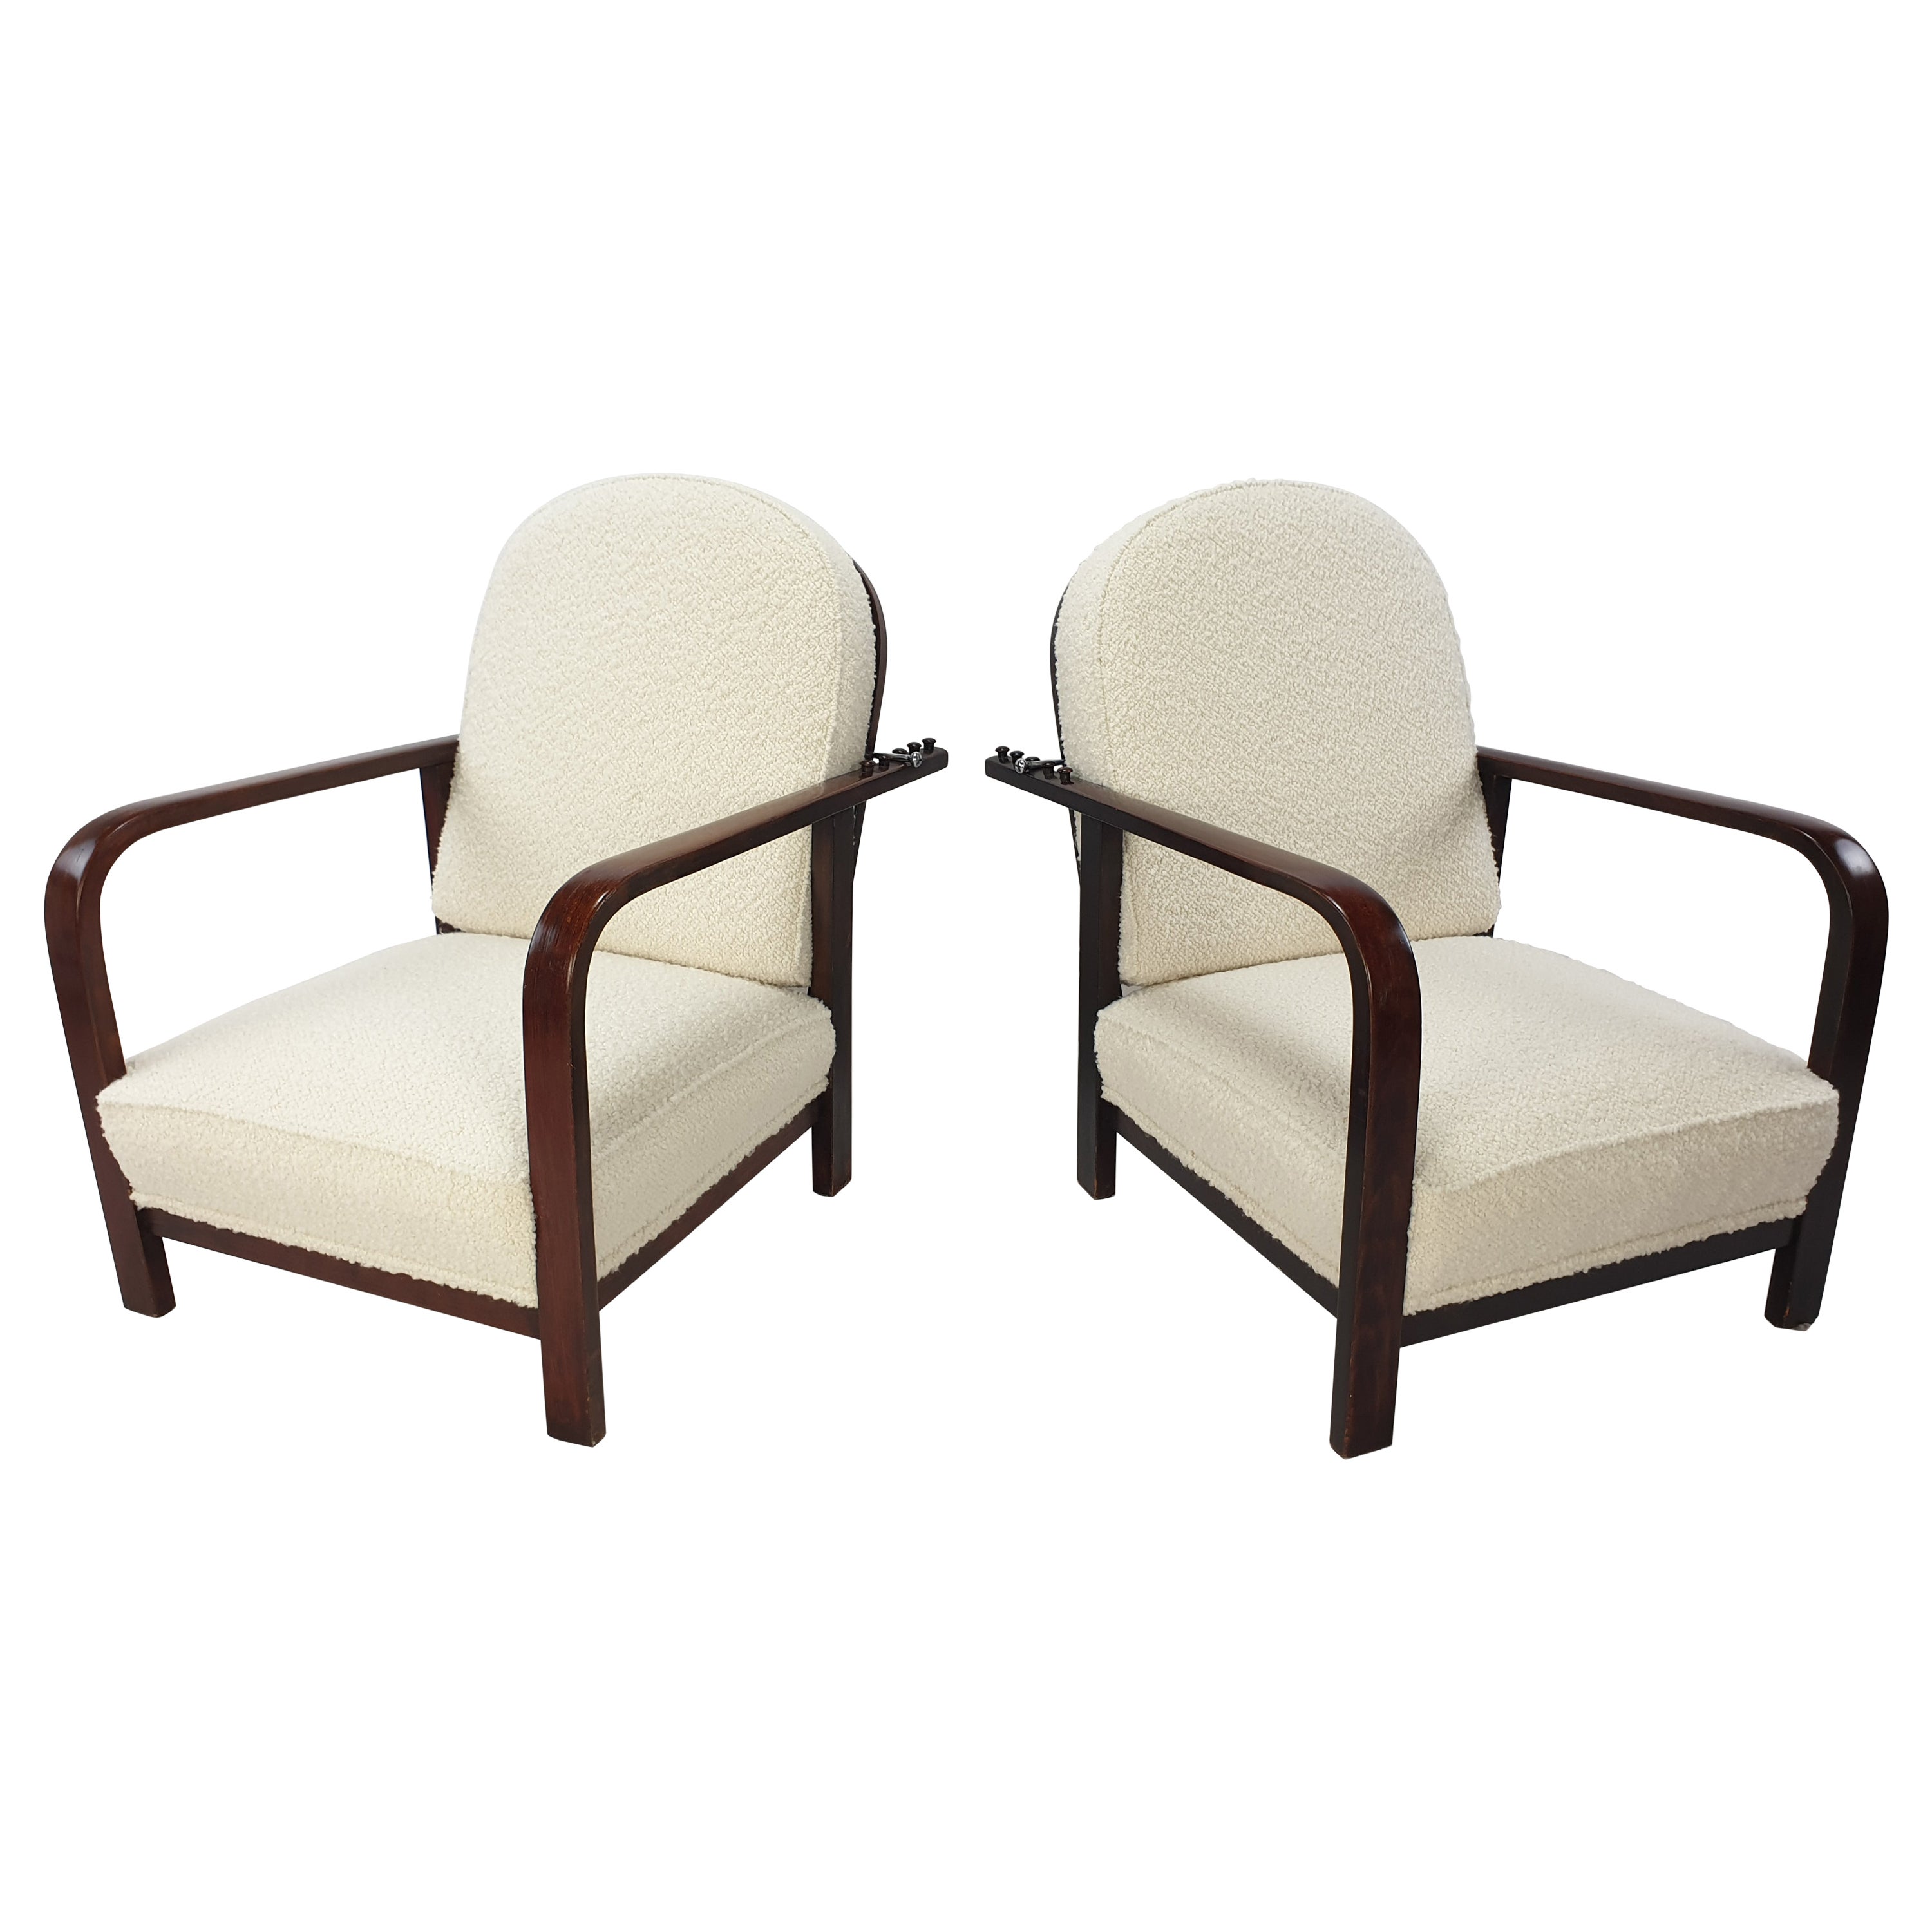 Pair of Adjustable Lounge Chairs by Thonet, 1930's